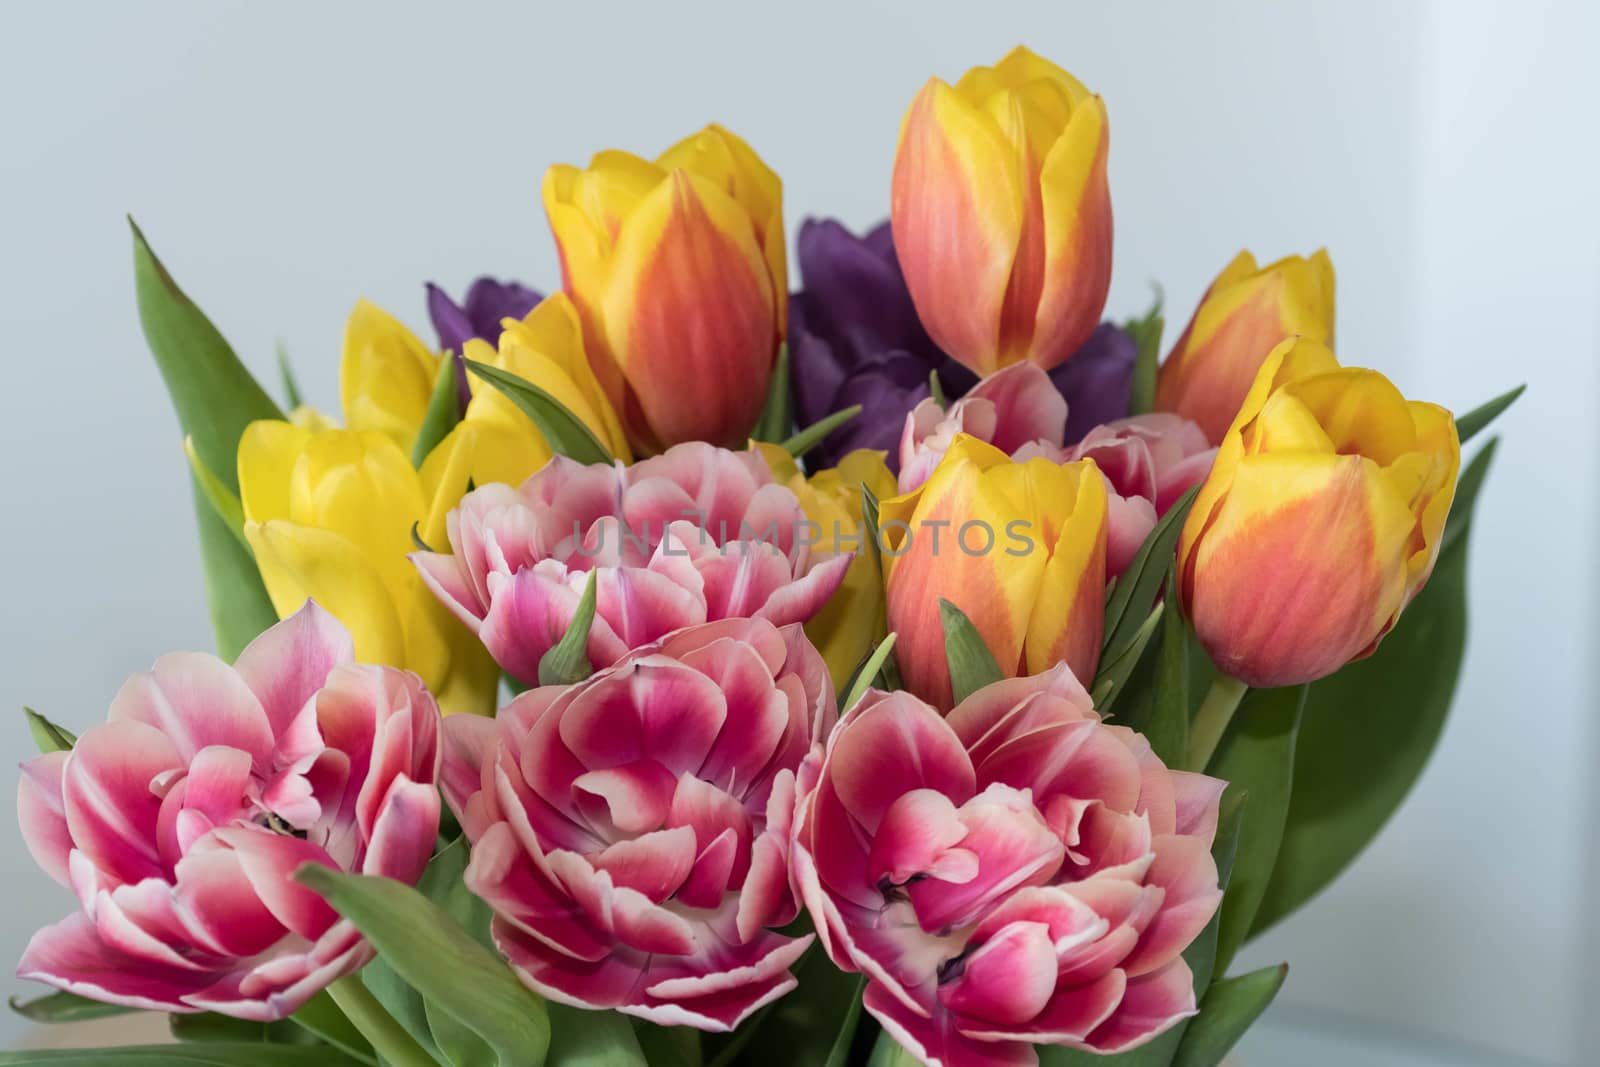 A bunch of Spring tulips